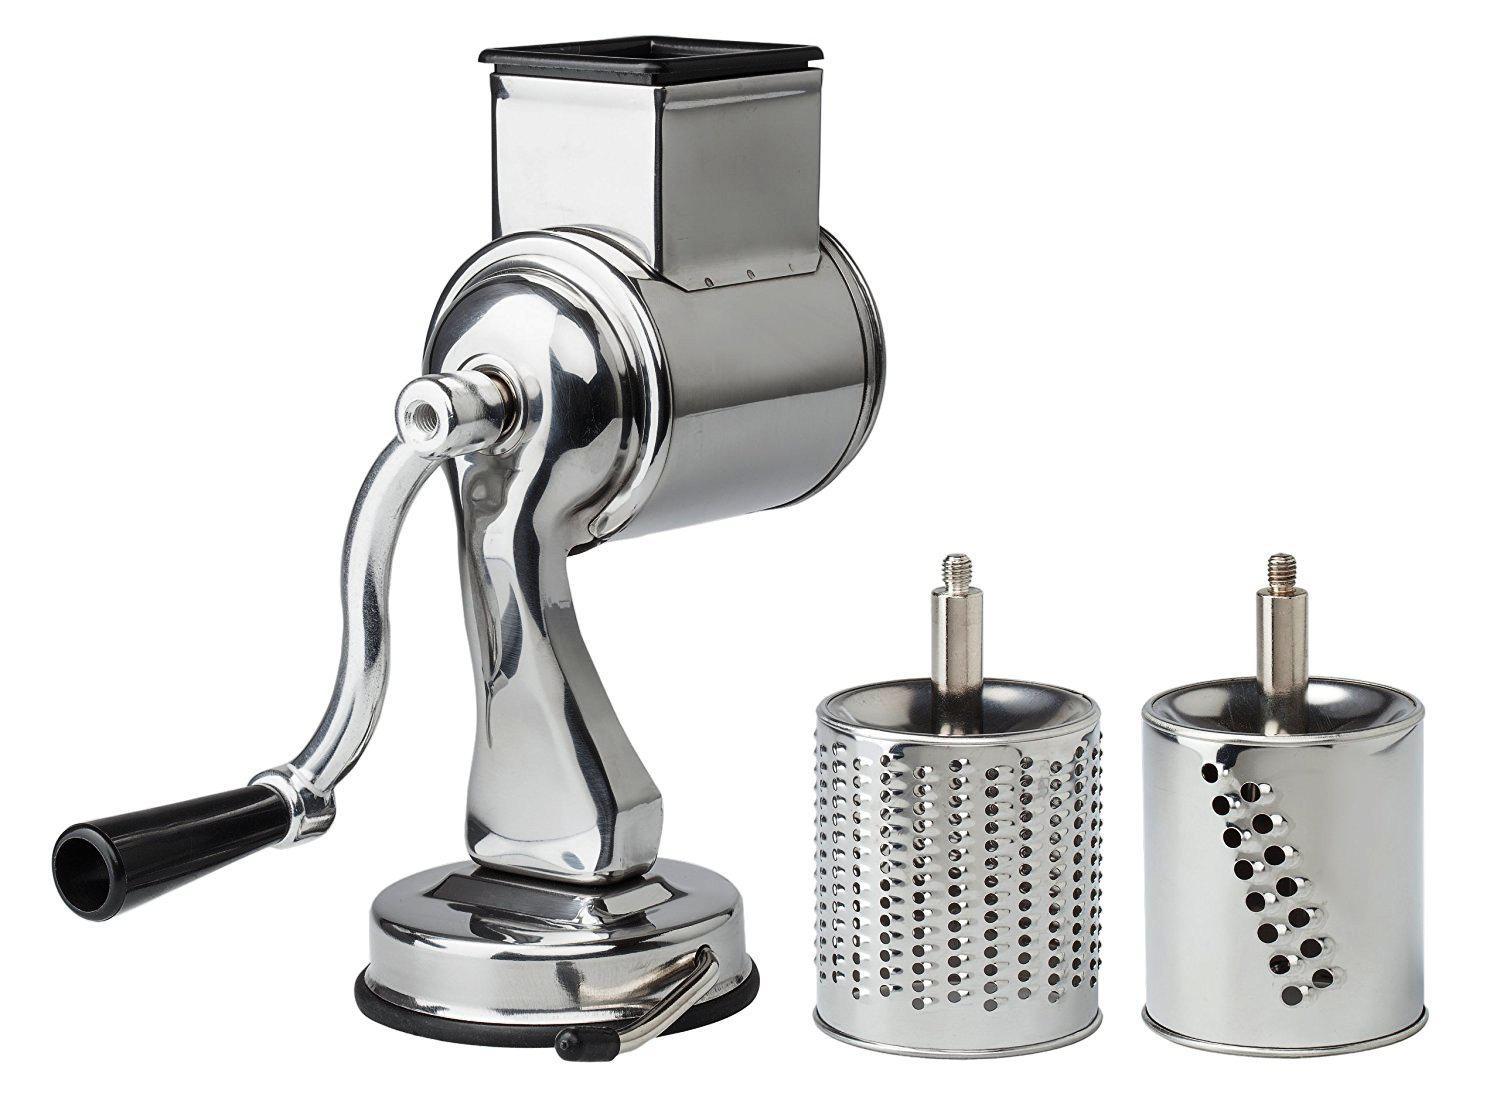 Rotary Cheese Grater, FOOD PREP